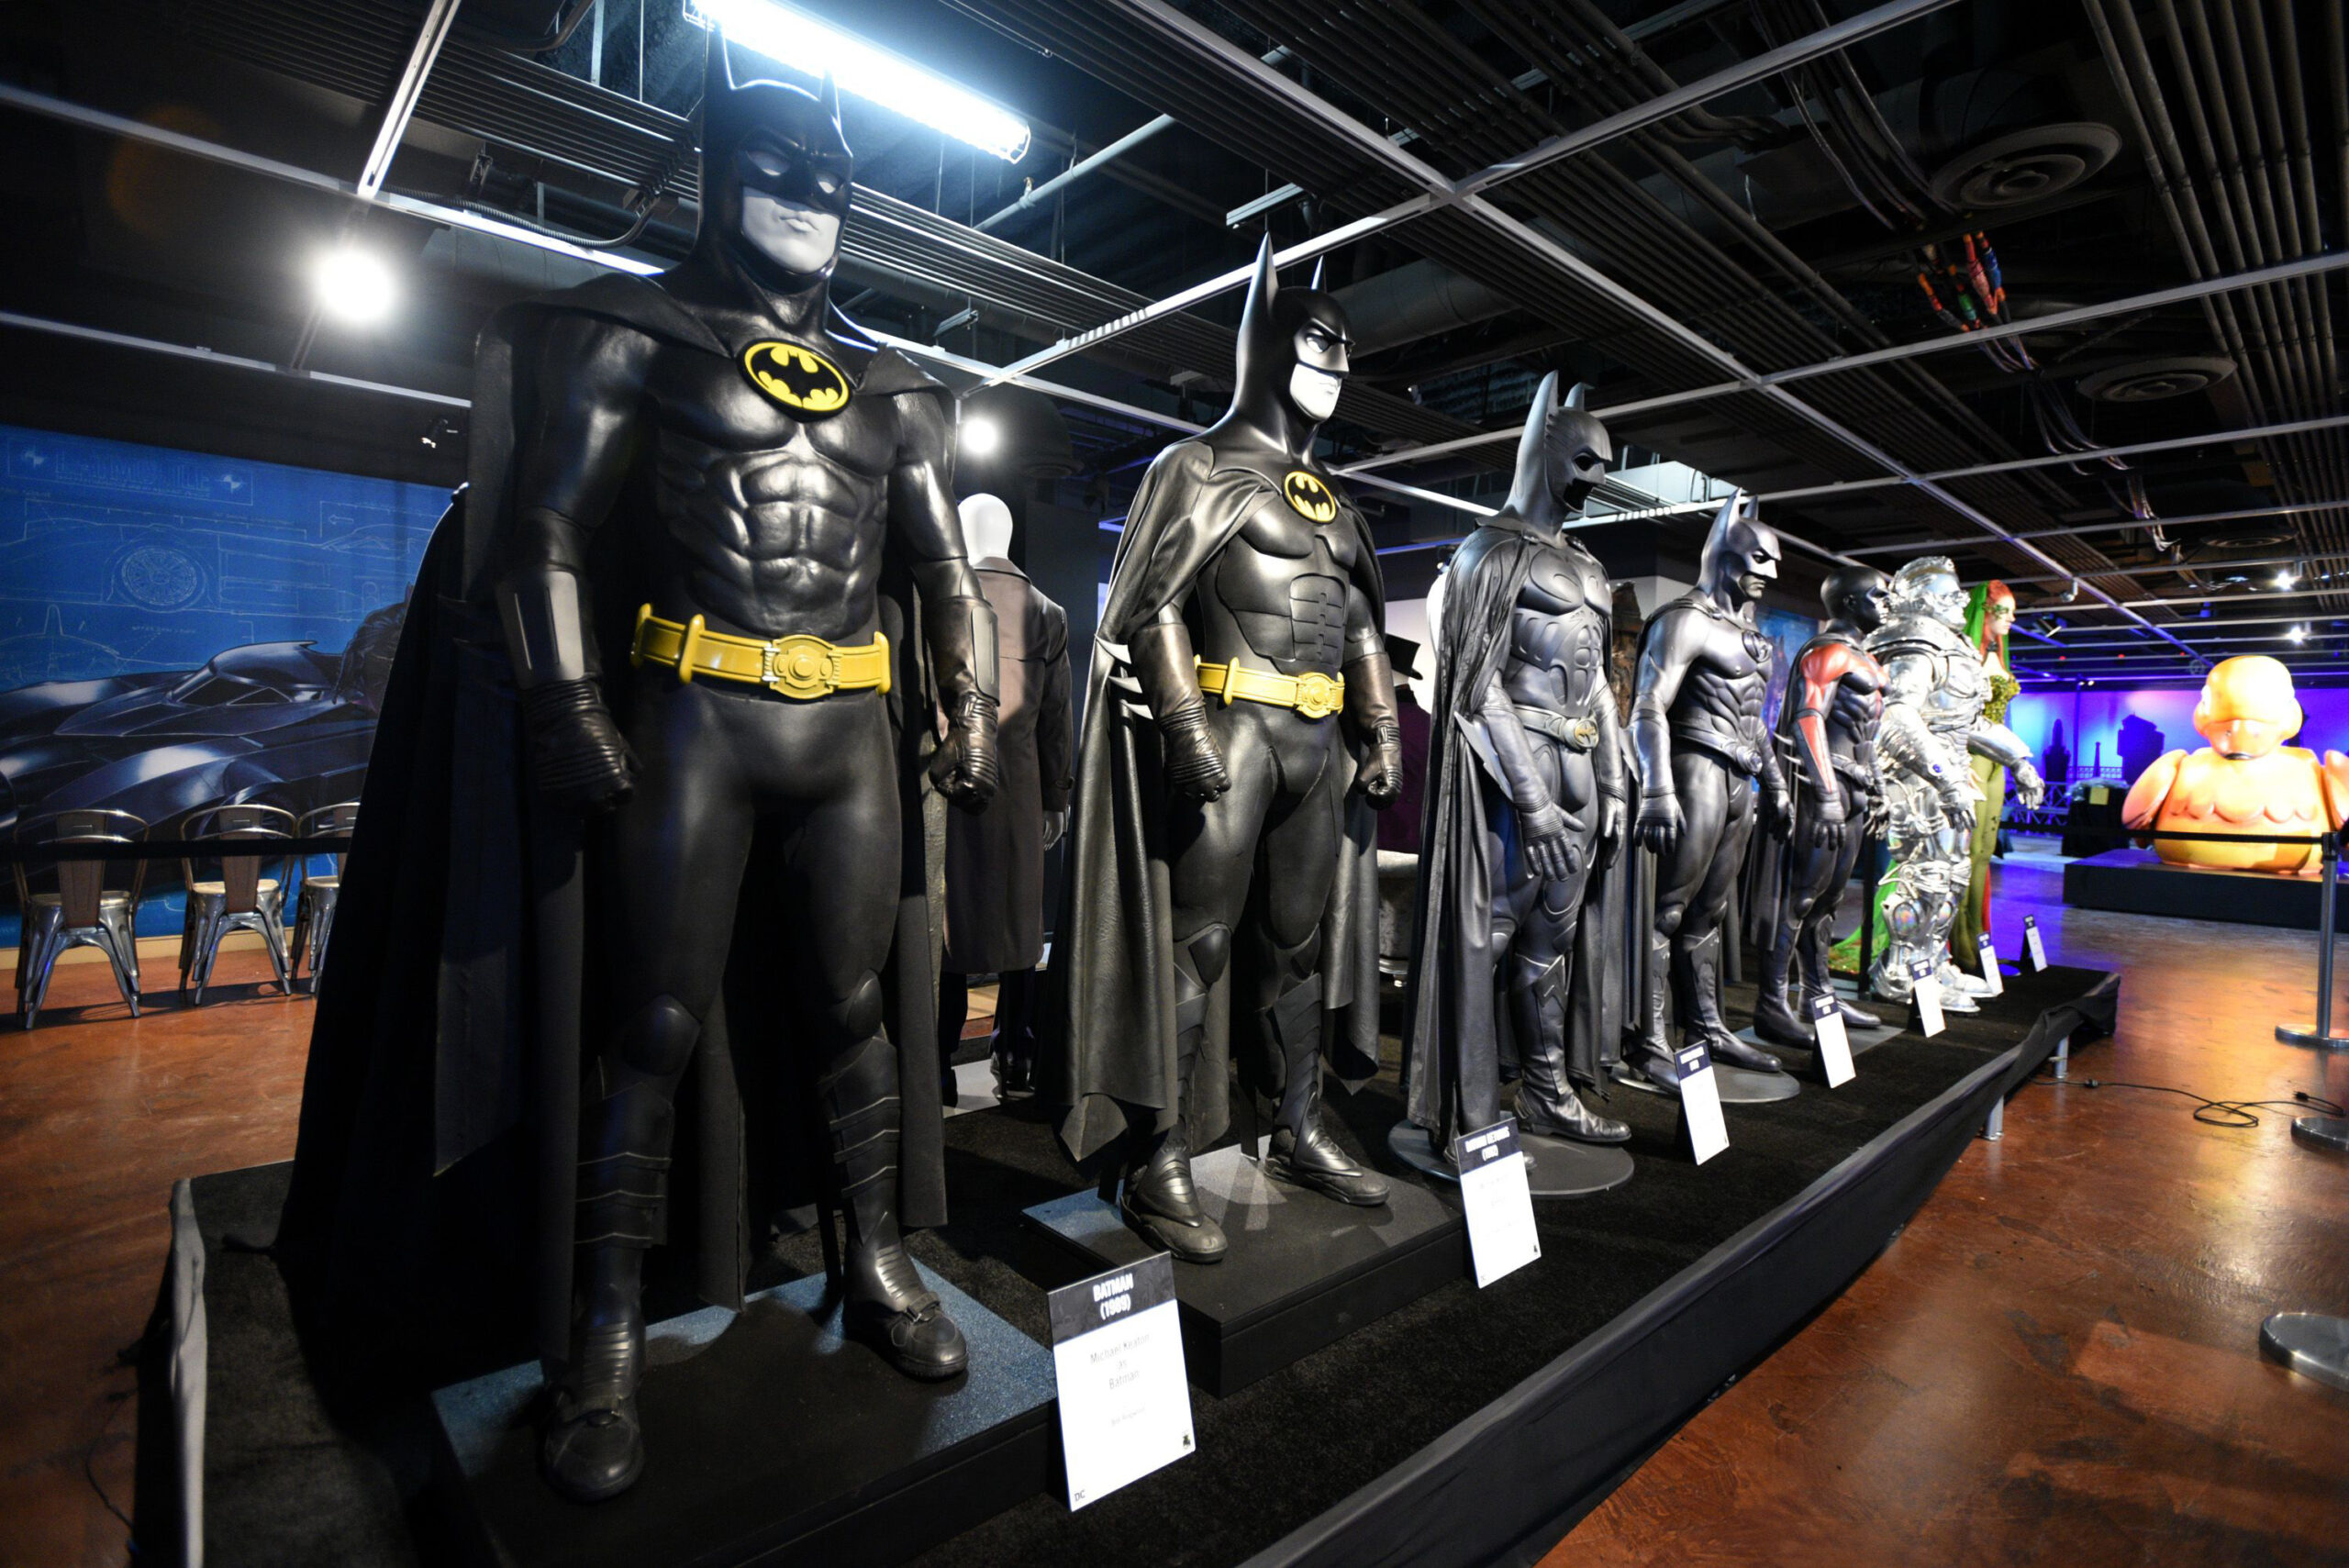 The Batman Experience [credit: foto di Andrew Toth; Copyright 2019 Getty Images; courtesy of Warner Bros. Entertainment Italia]